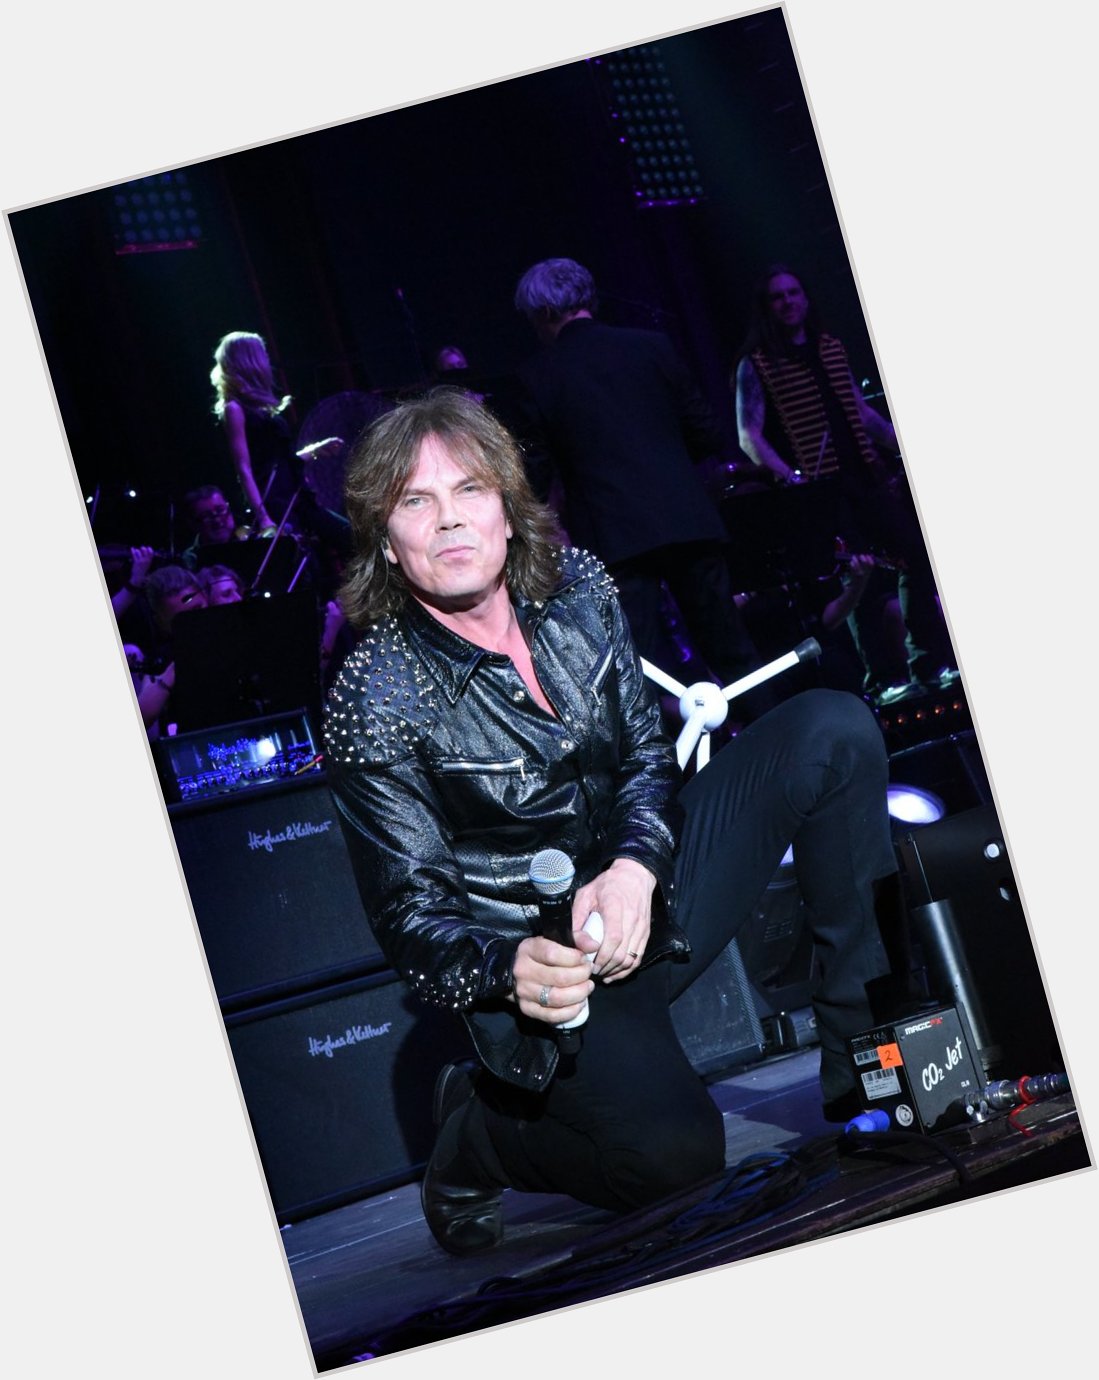 A very Happy Birthday to Joey Tempest. Wishing you all the best. 